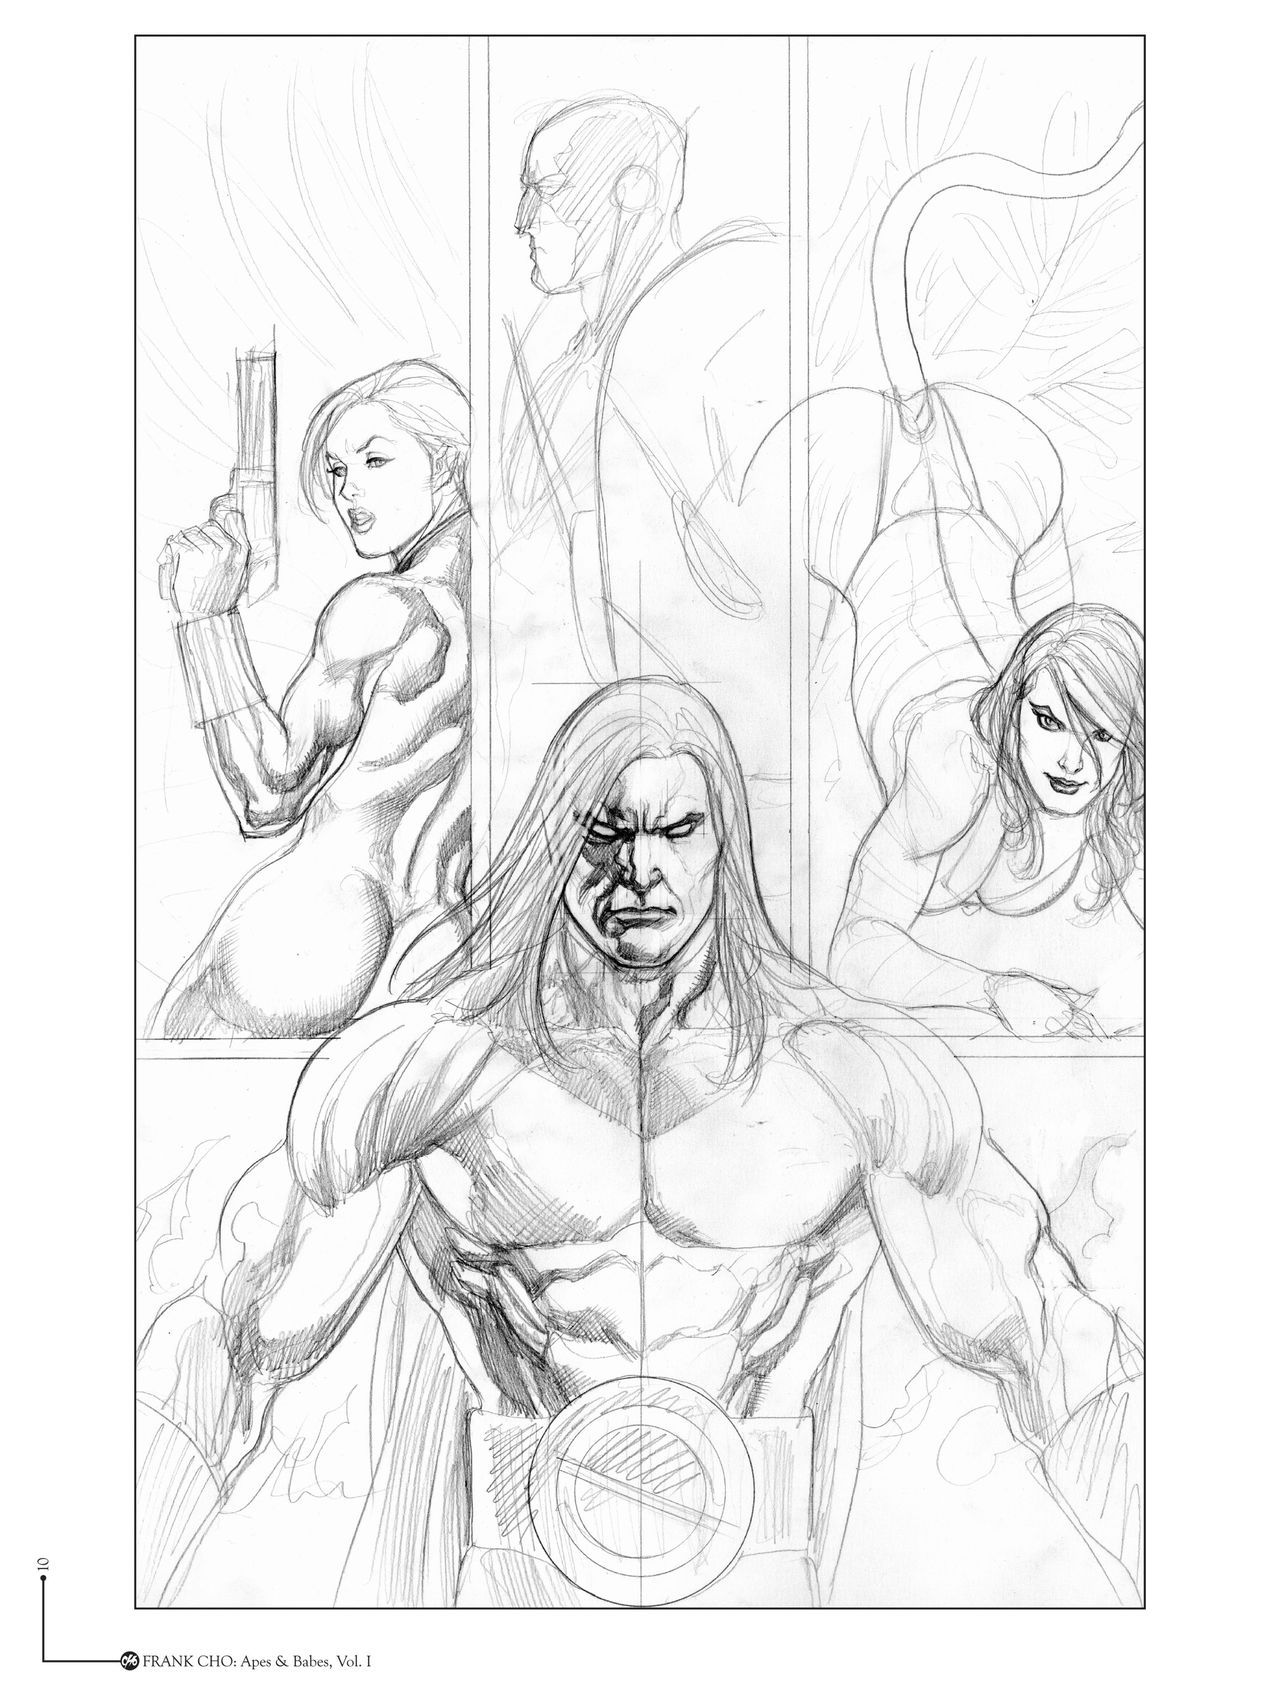 [Frank Cho] Apes & Babes: The Art Of Frank Cho 9